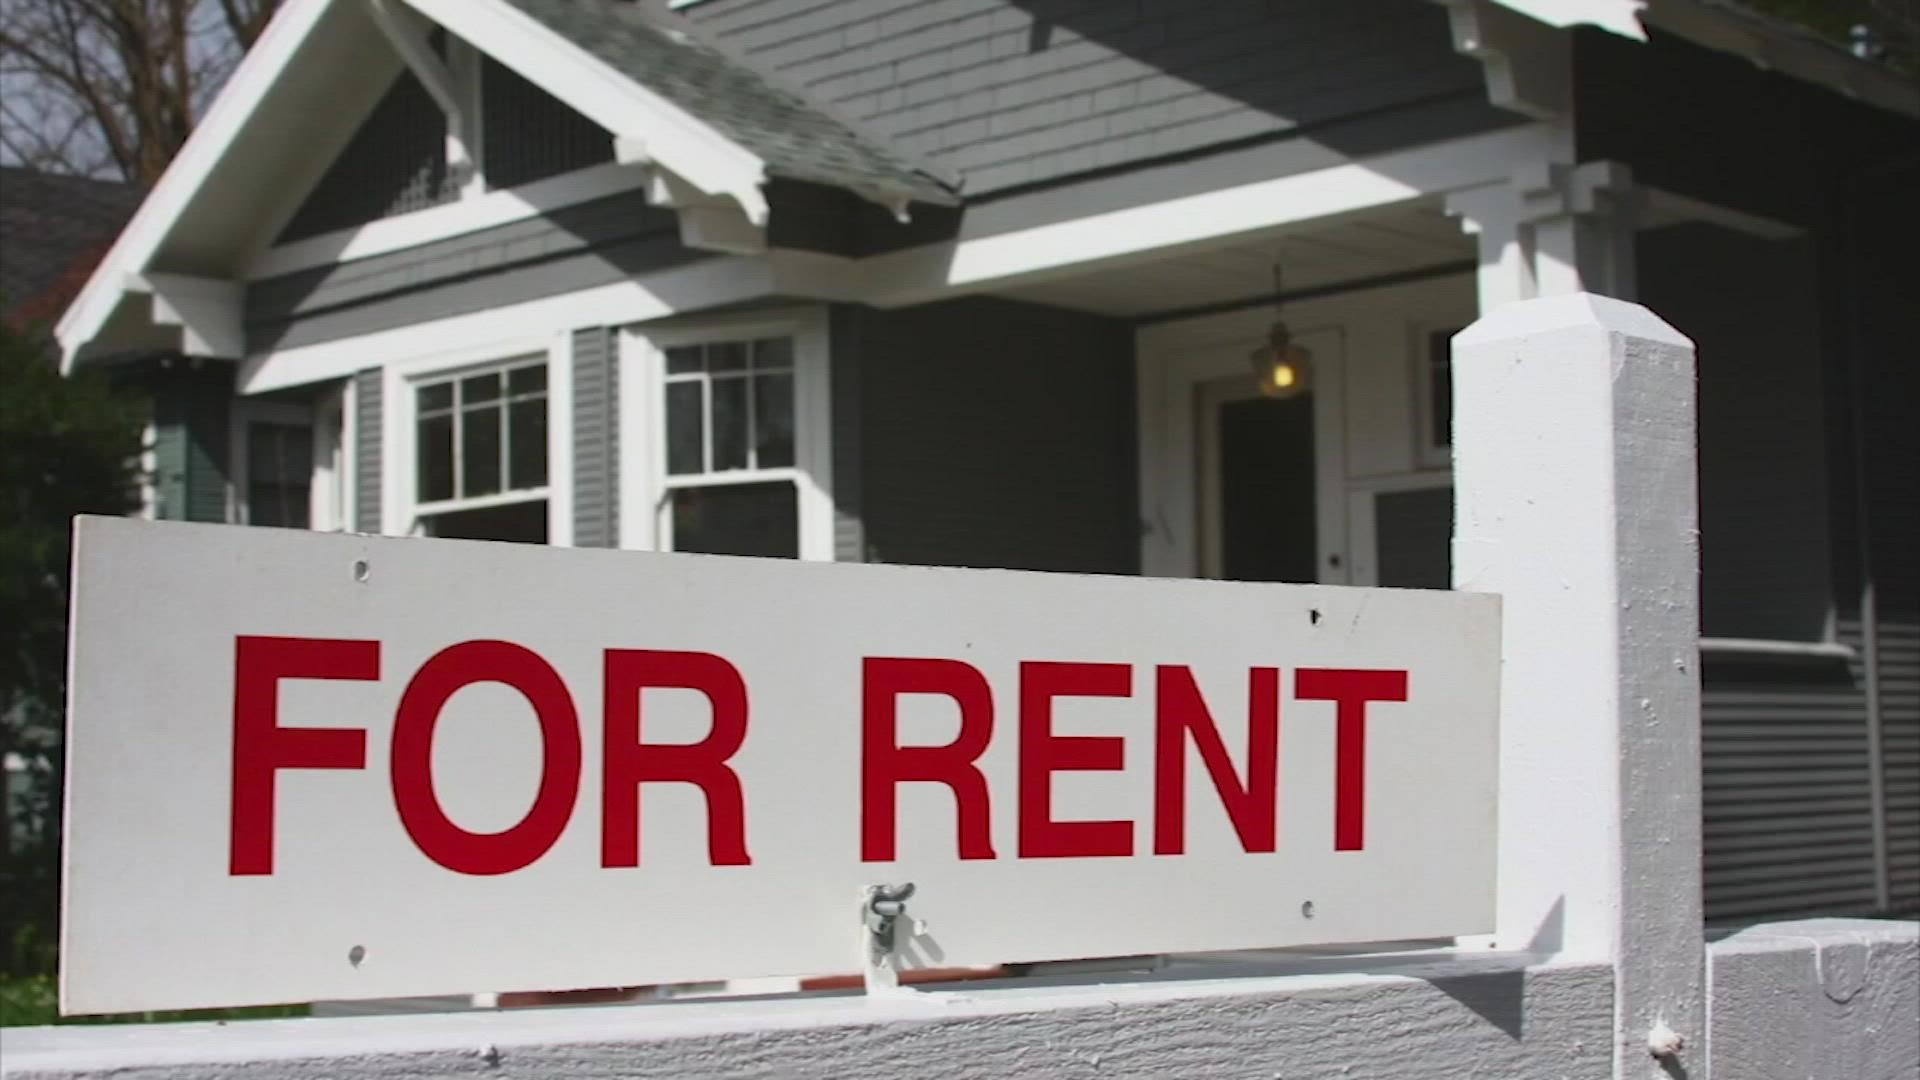 With homes and apartments so tough to find this year, many renters are desperate to find anything. That's how one woman ended up falling victim to a rental scam.